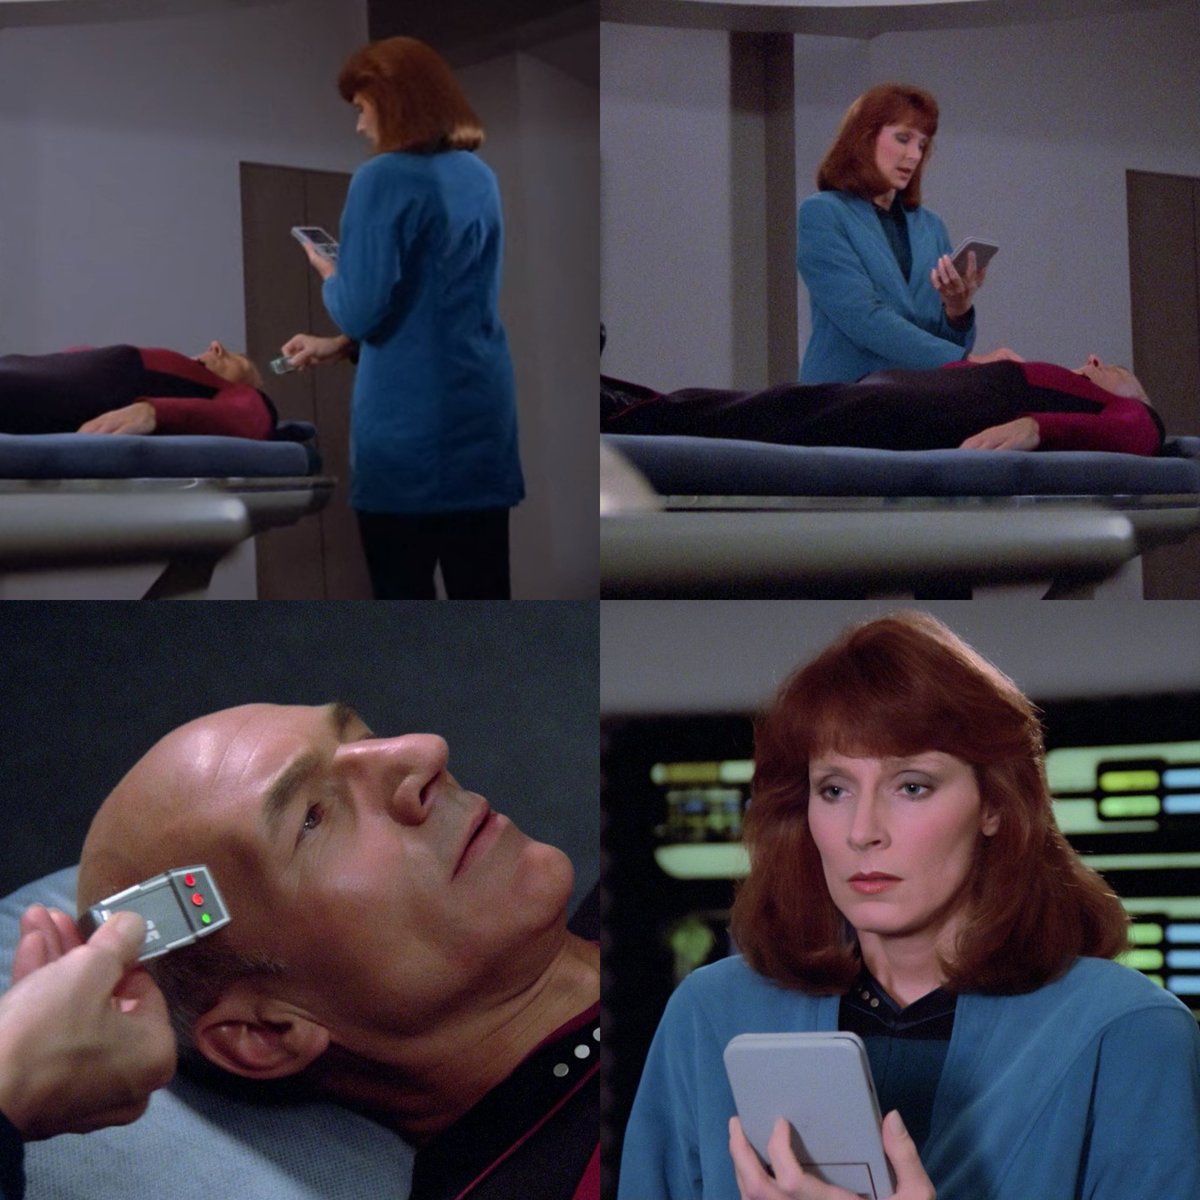 It's interesting how Dr. Crusher uses a PADD and a small medical scann...